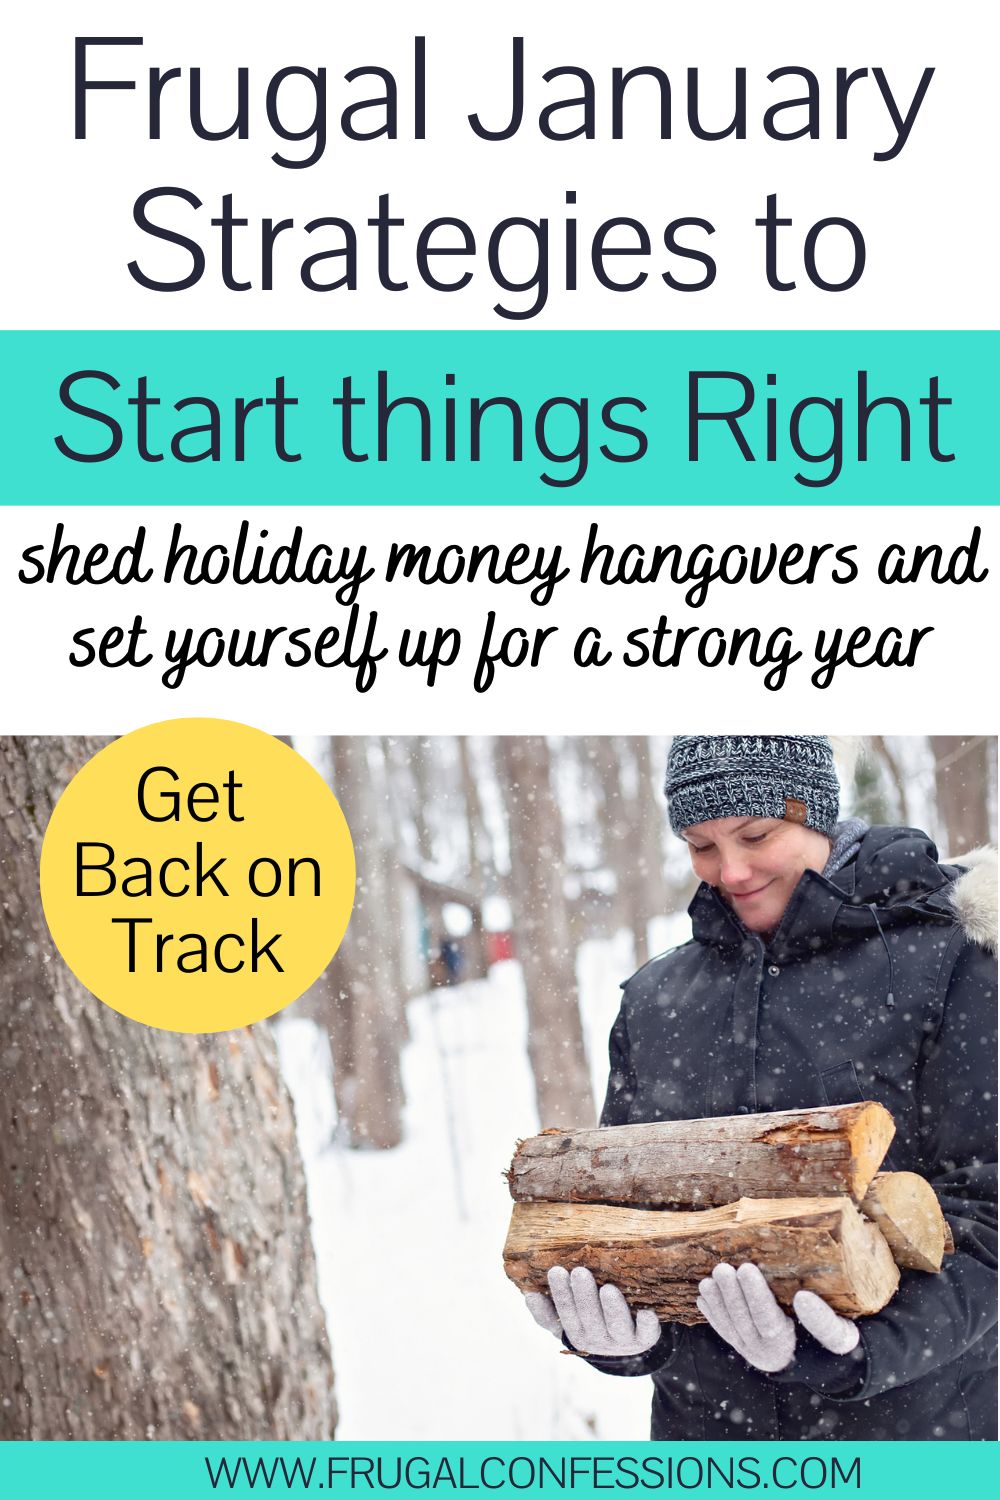 11 Frugal January Strategies to Spark Financial Change (this Year)